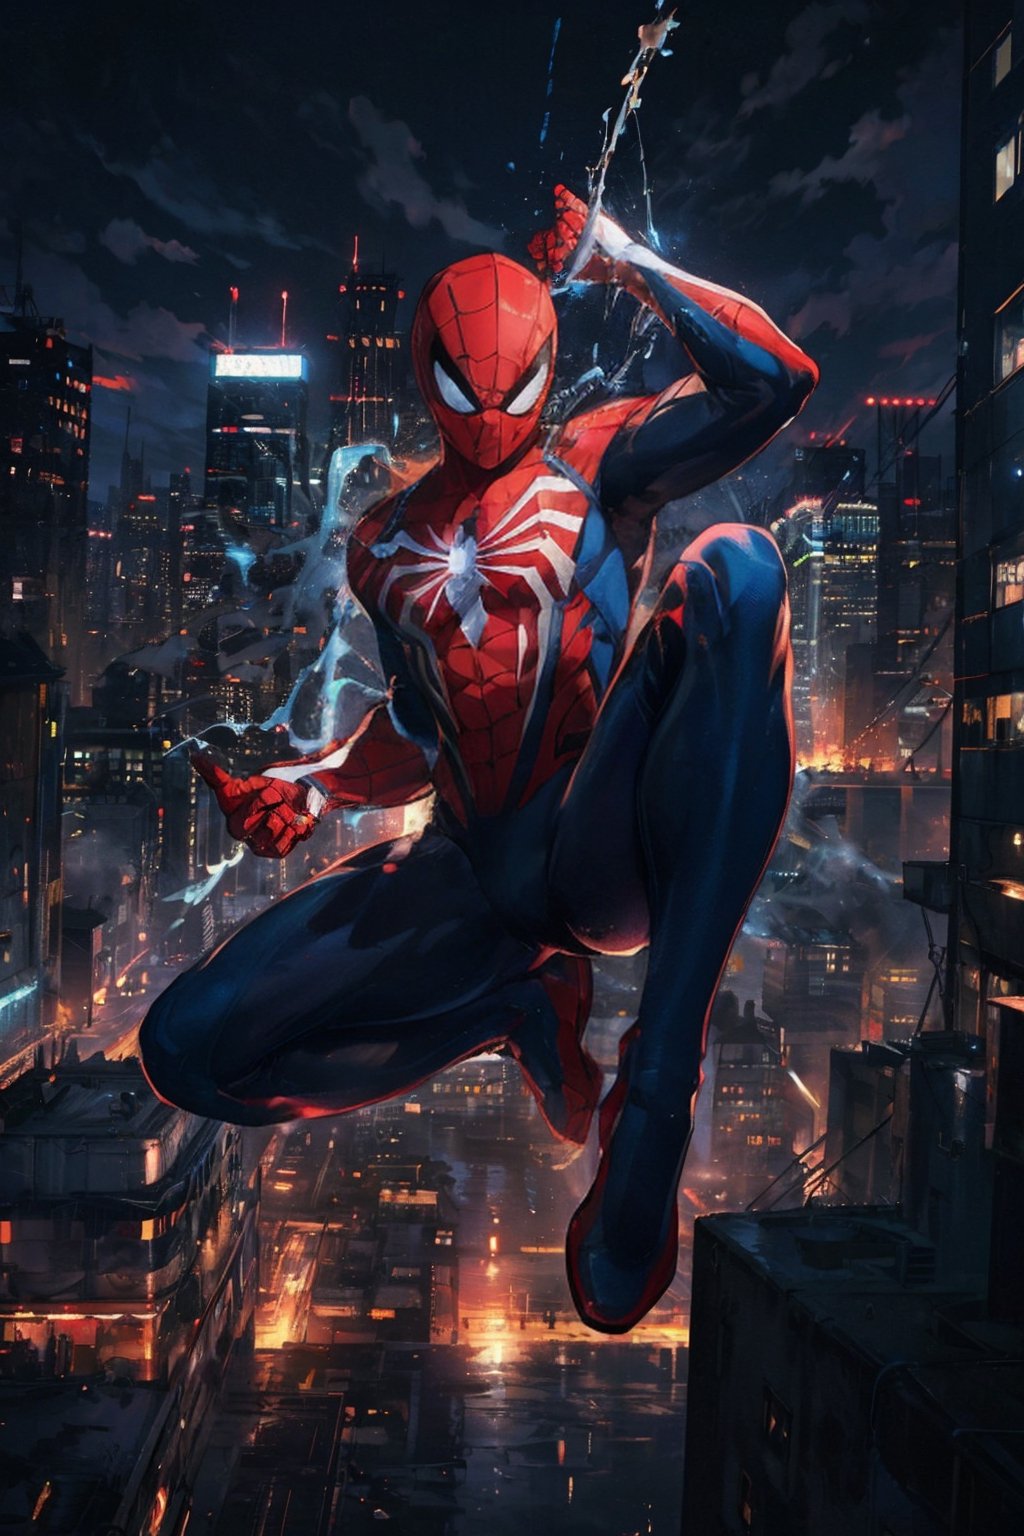 Against the backdrop of a city skyline painted with the warm hues of early night ,Spider-Man delivering a powerful kick while swinging through the city. His vibrant red and blue costume contrasts with the urban landscape, and the iconic white eyes of his mask reflect the fading daylight. The wind tousles his sleek, web-patterned suit as he stands ready for action. With the city sprawled out beneath him, Spider-Man's presence on the building top is a silent promise of protection and vigilance